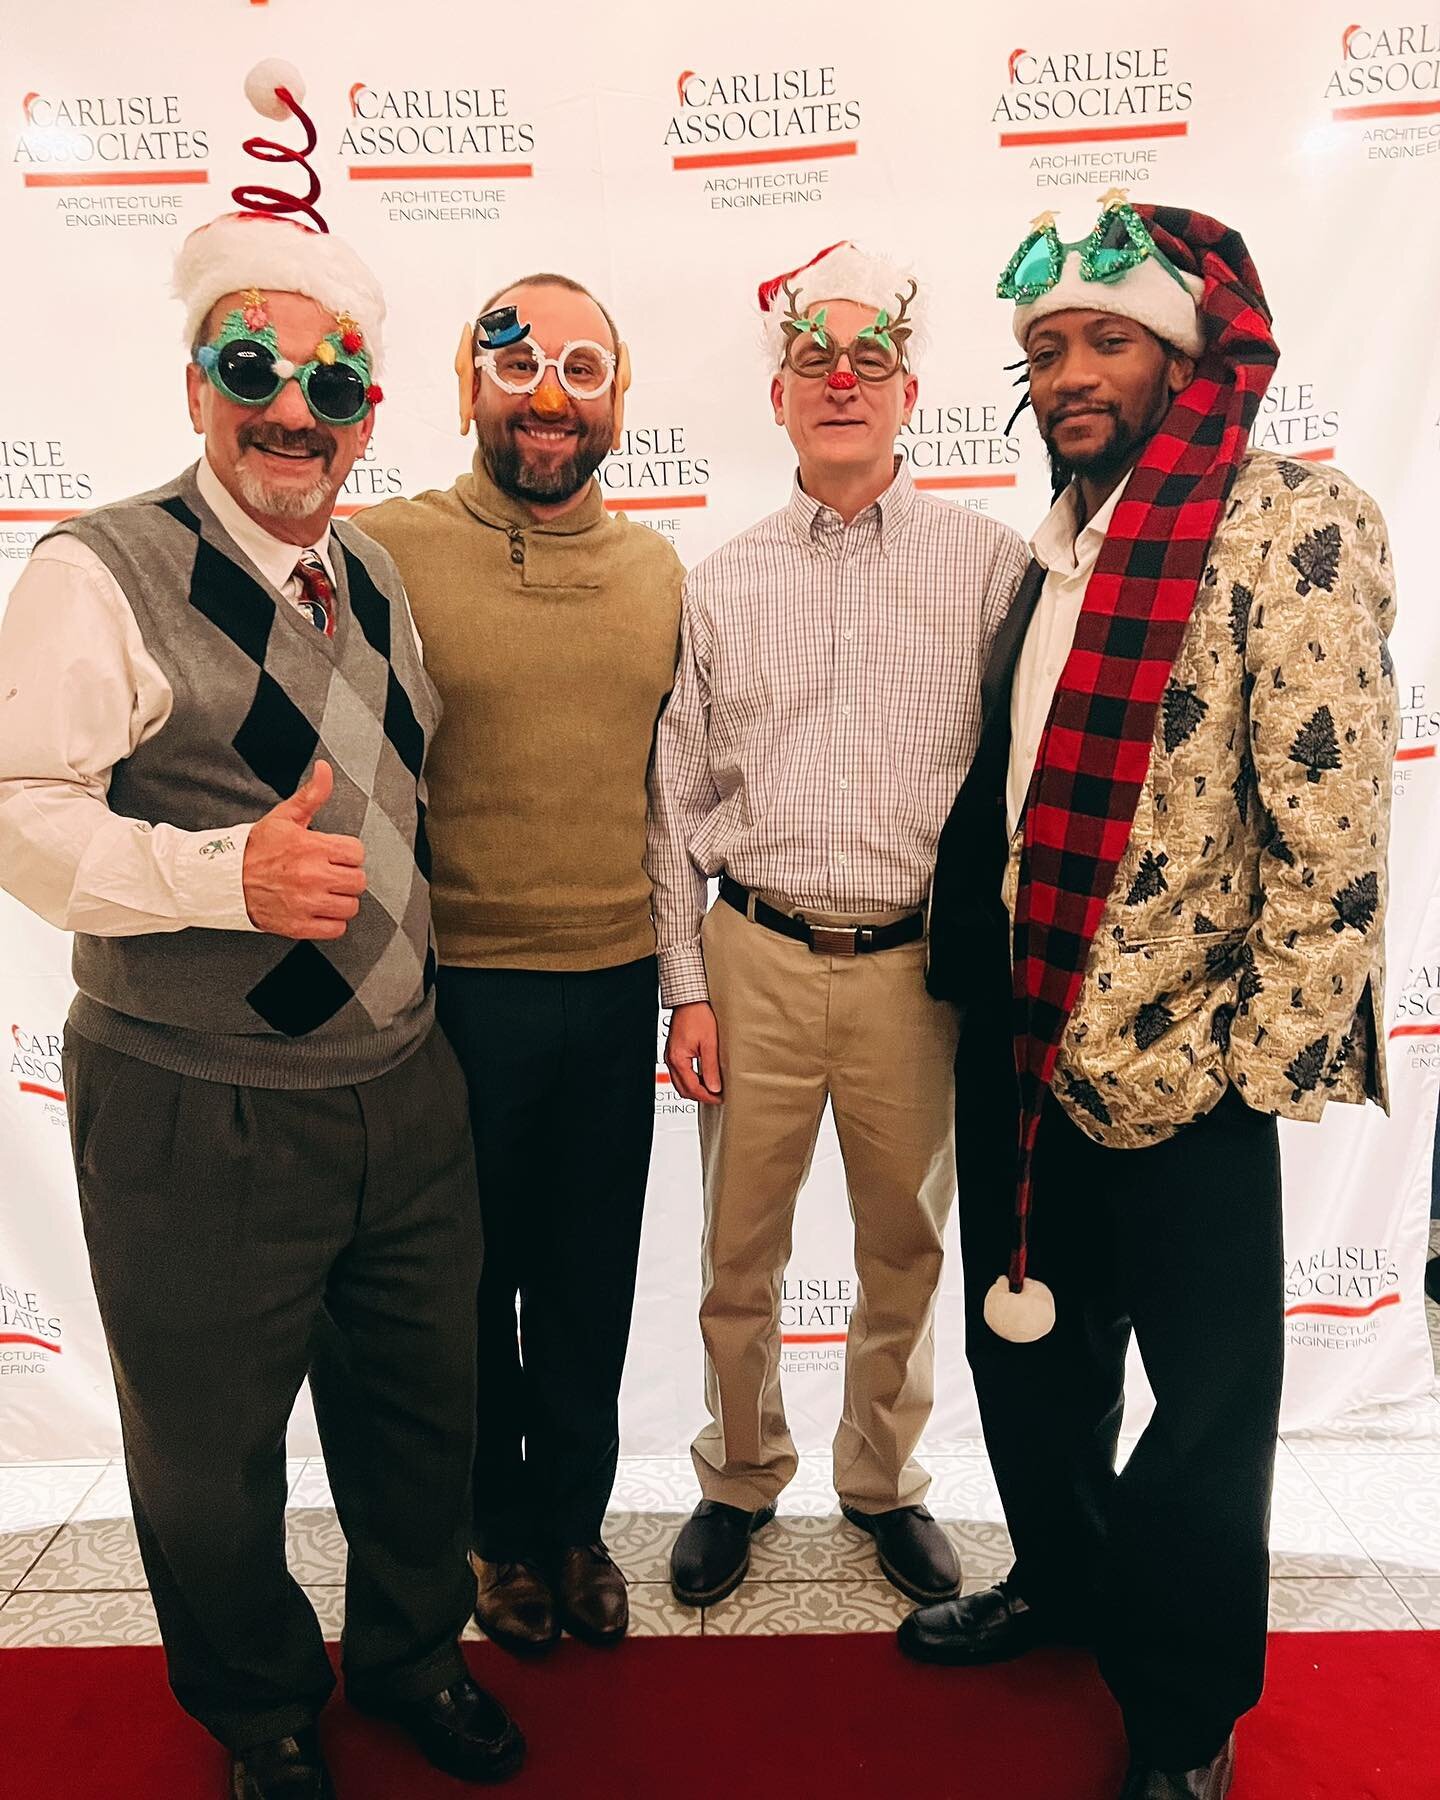 Carlisle Associates Christmas Party 2023 was a success! Thank you to our wonderful team, past and present, for an amazing night. It is always a good time when the Carlisle crew gets together!

Happy Holidays from our team to yours!